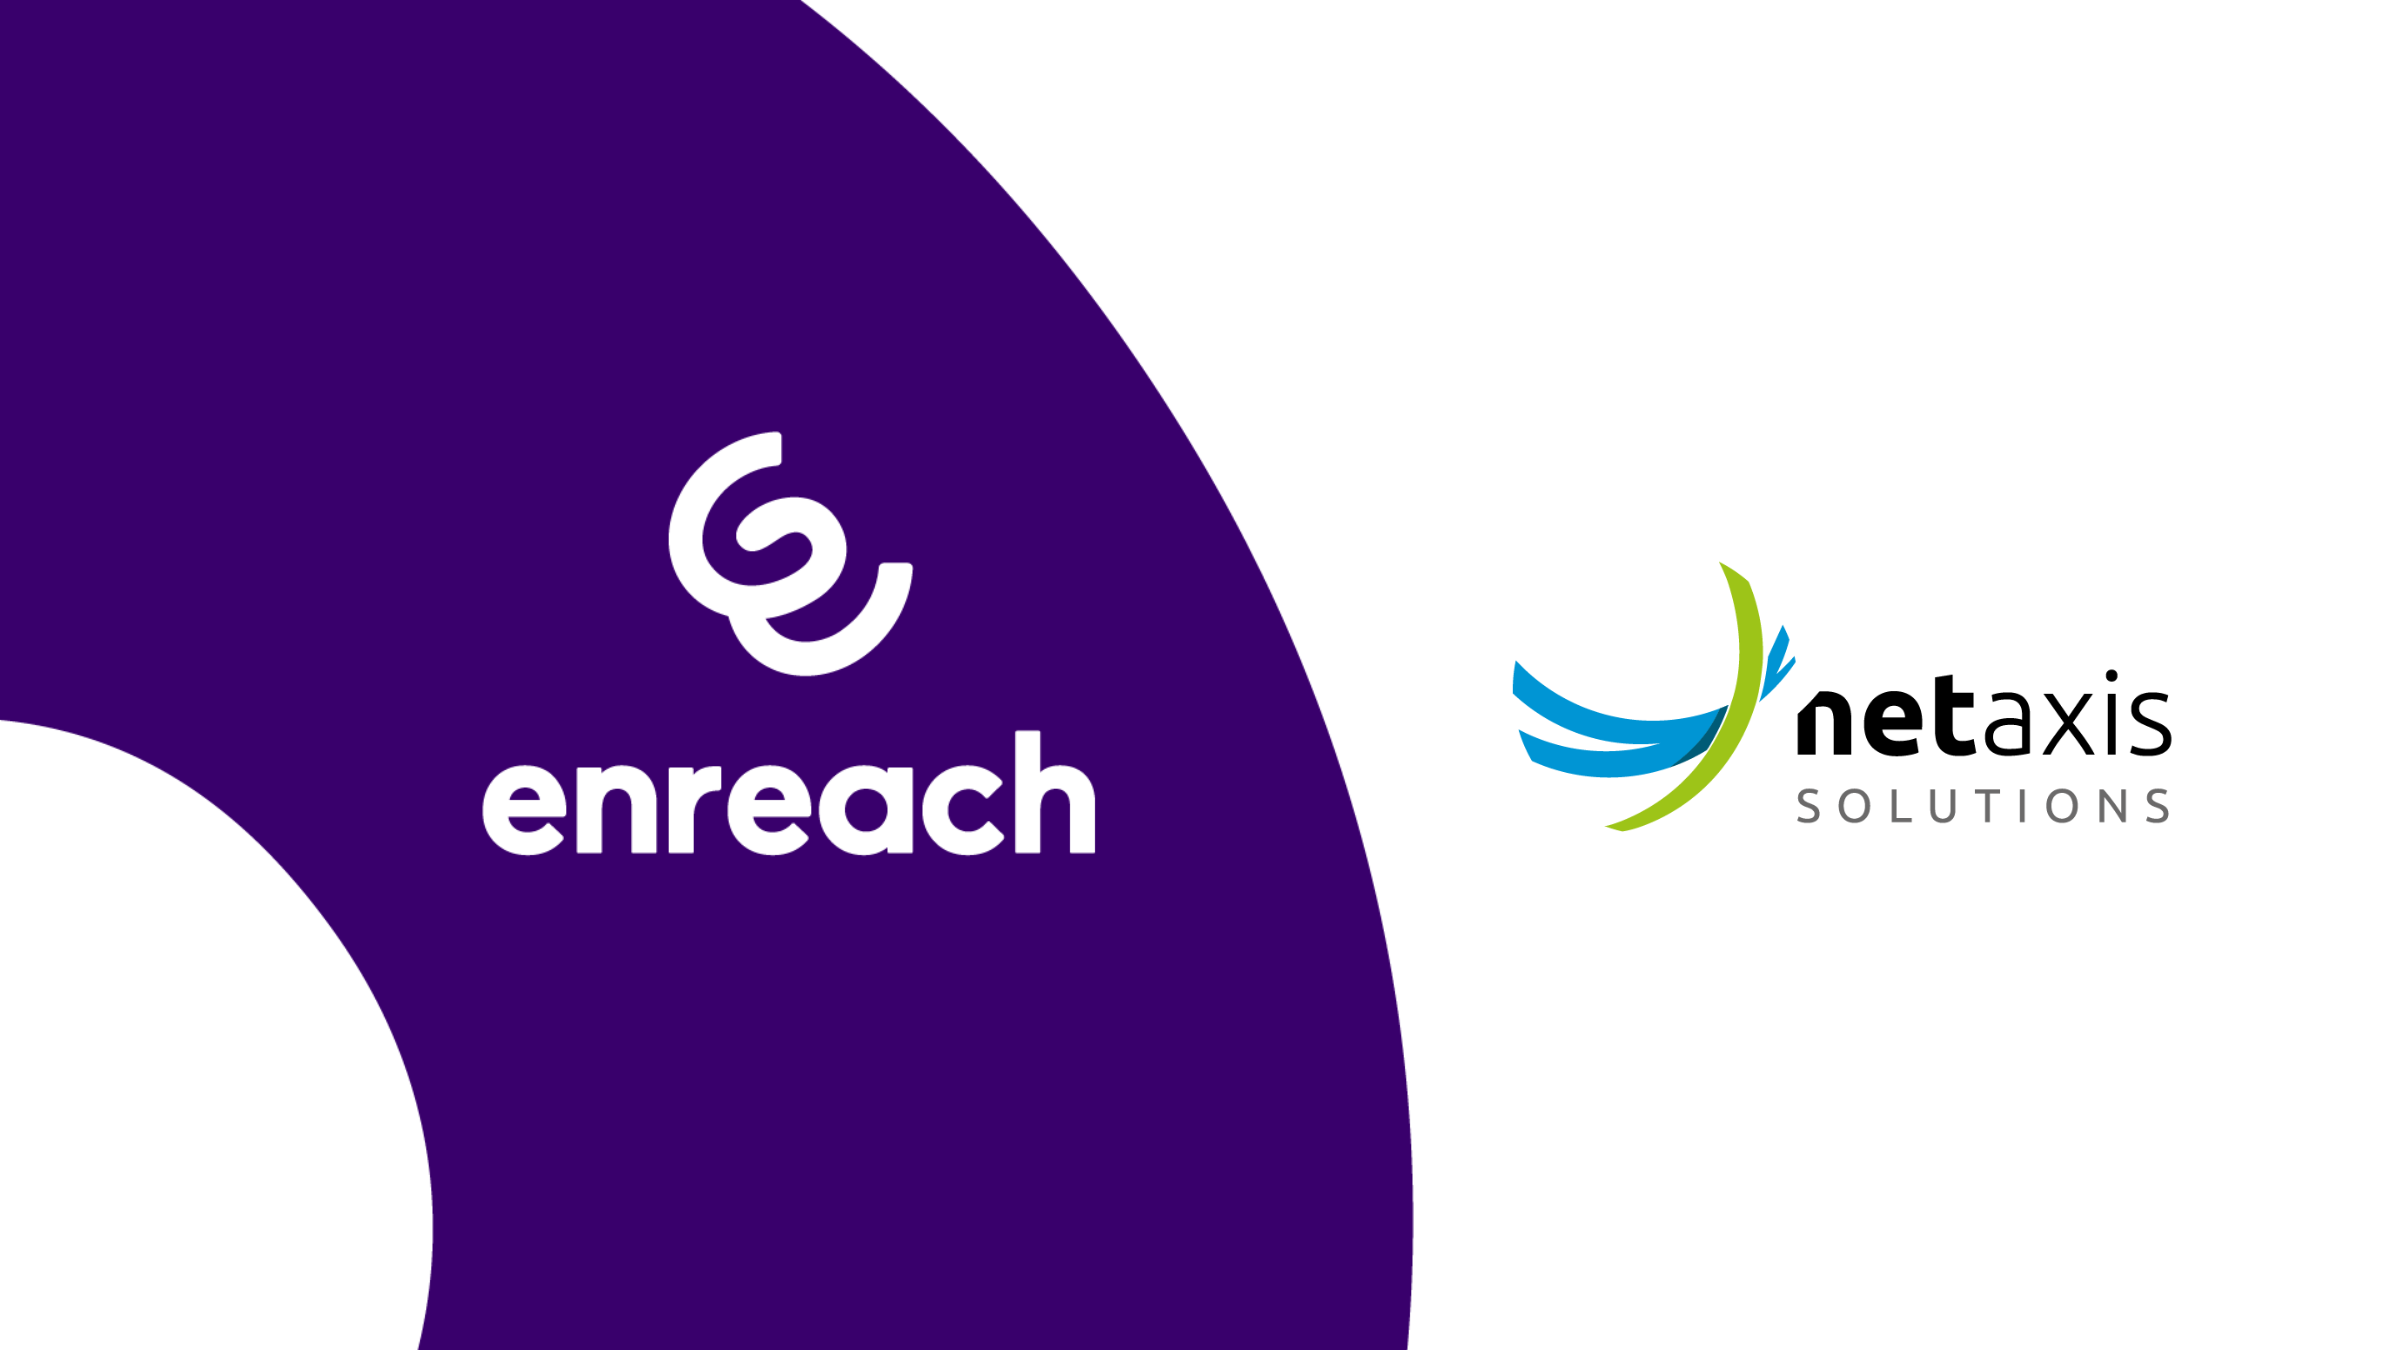 enreach-for-service-providers-and-netaxis-solutions